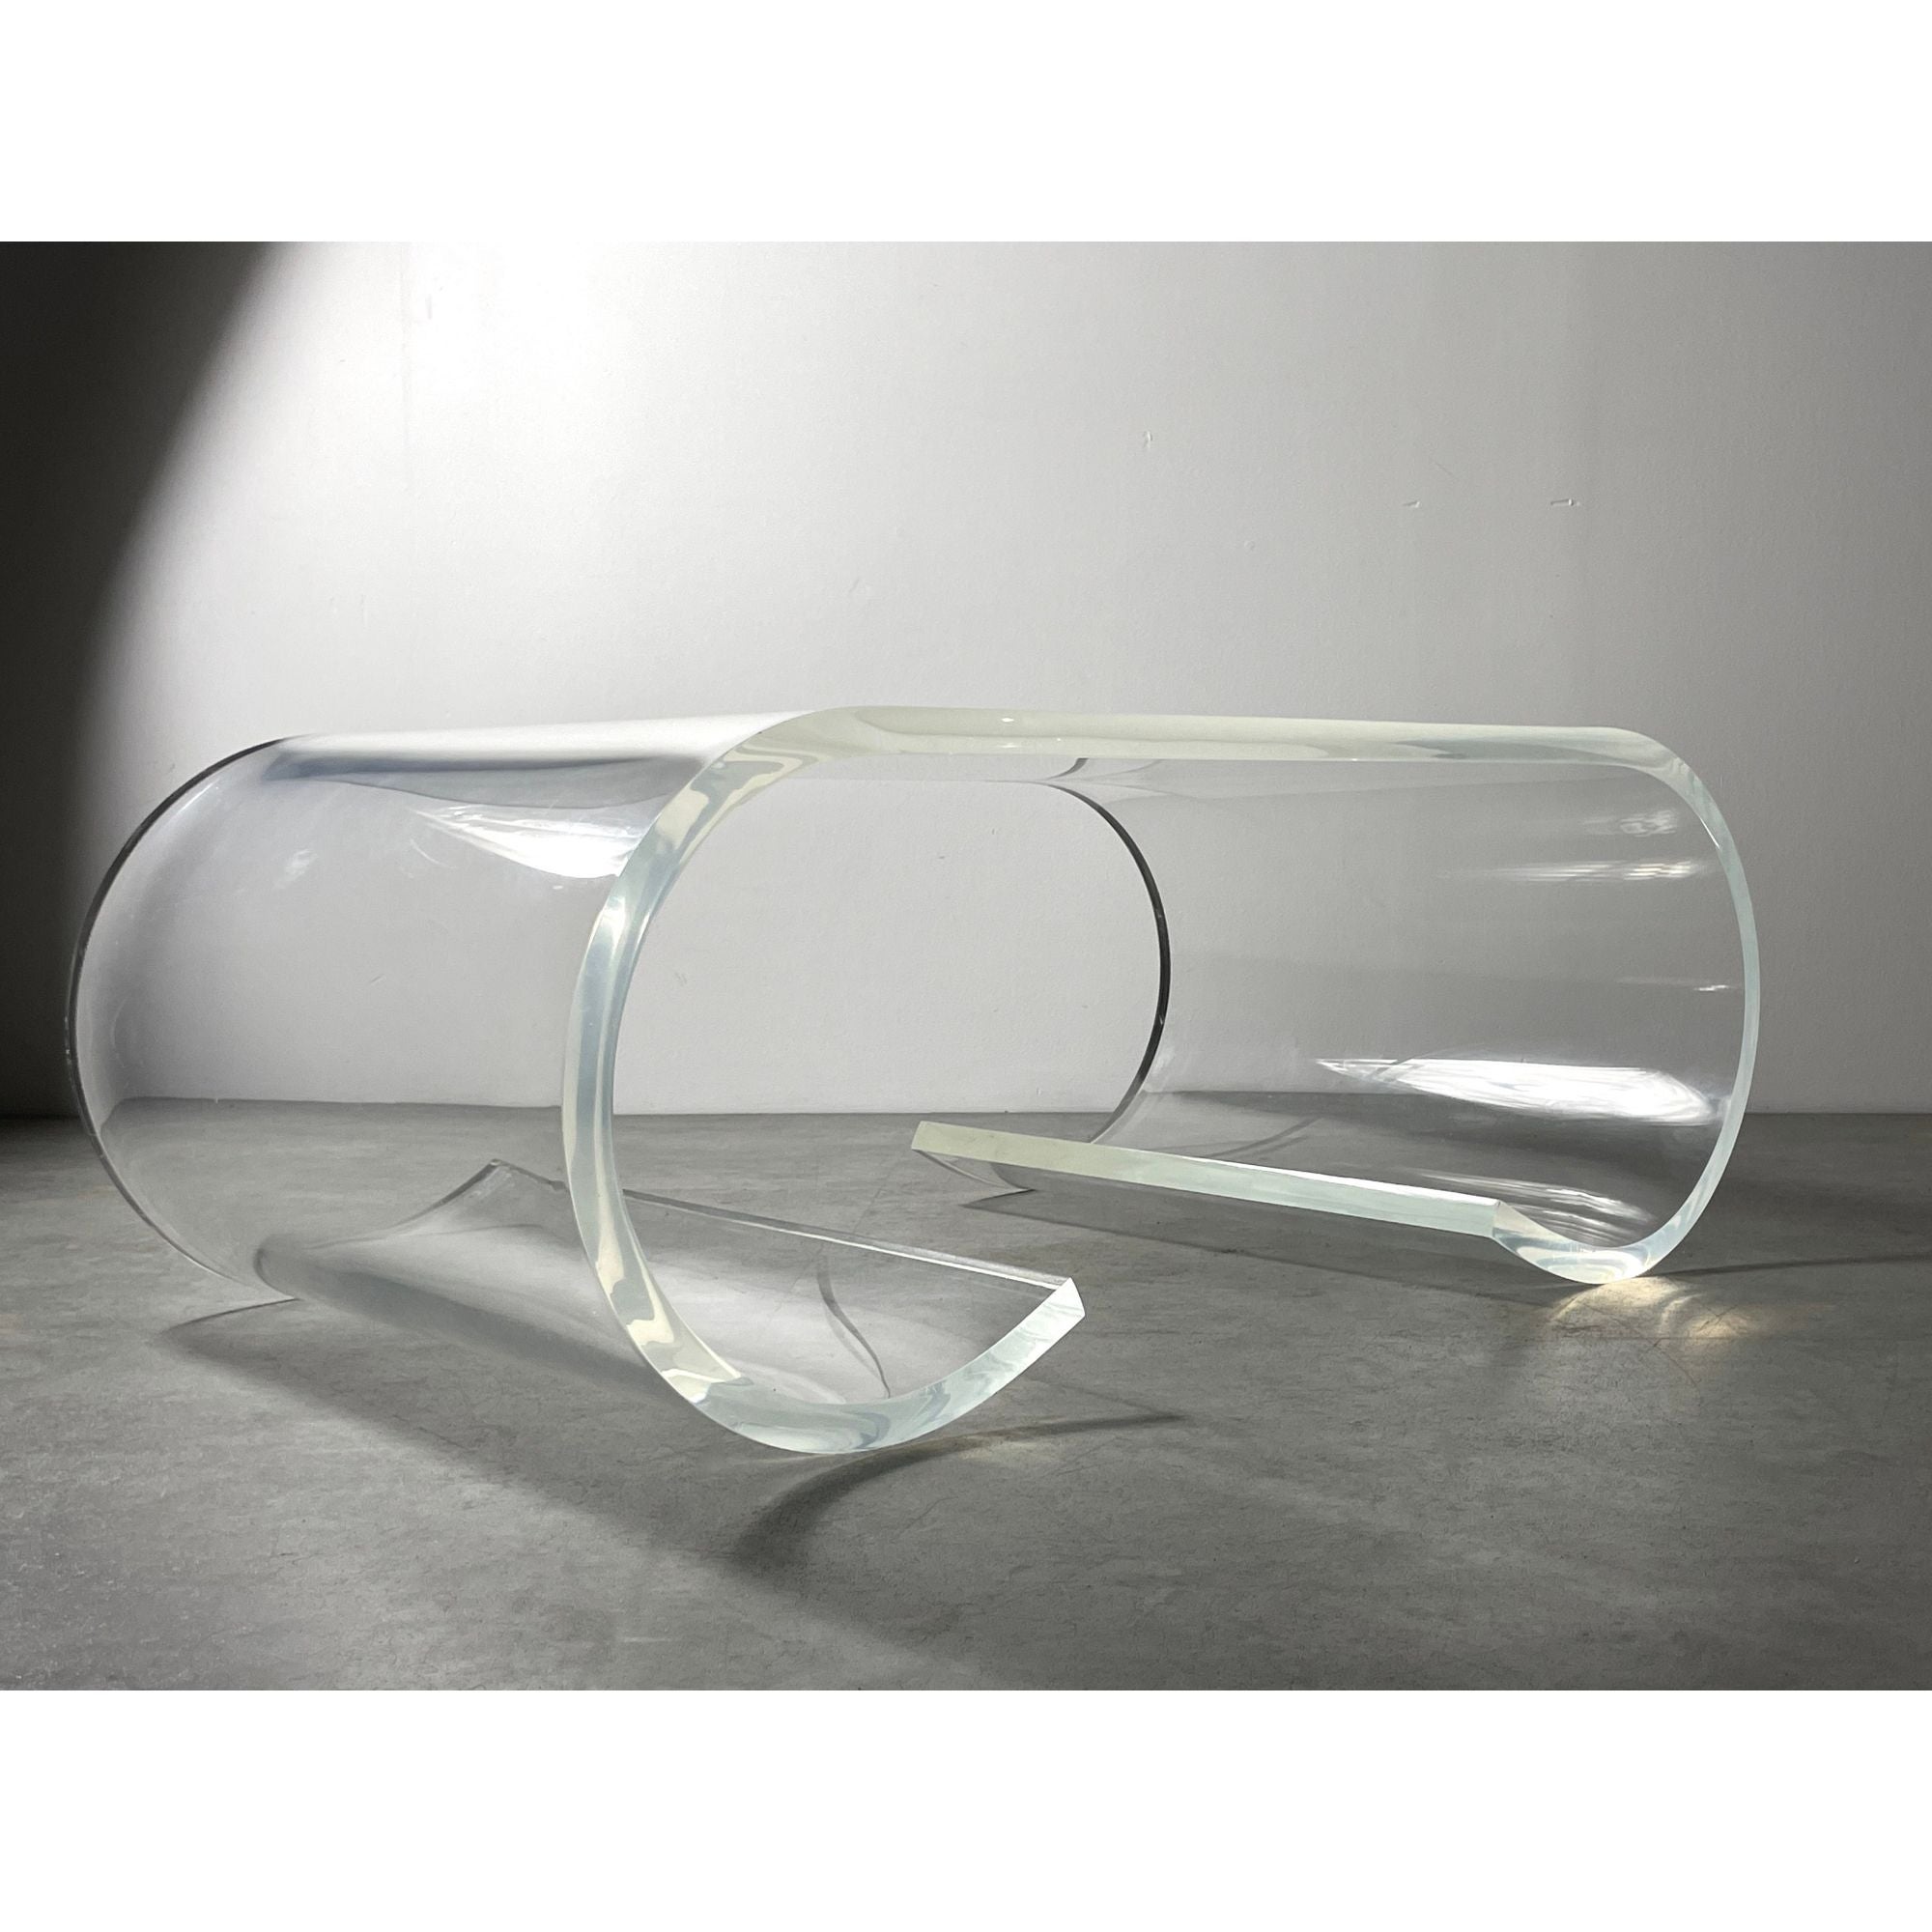 Vintage Mid Century Modern Coffee Table in Lucite circa 1970s

Incredible Lucite coffee table 
Scroll design formed of thick acrylic
In the manner of Karl Springer

Additional Information:
Materials: Lucite
Dimensions: 24